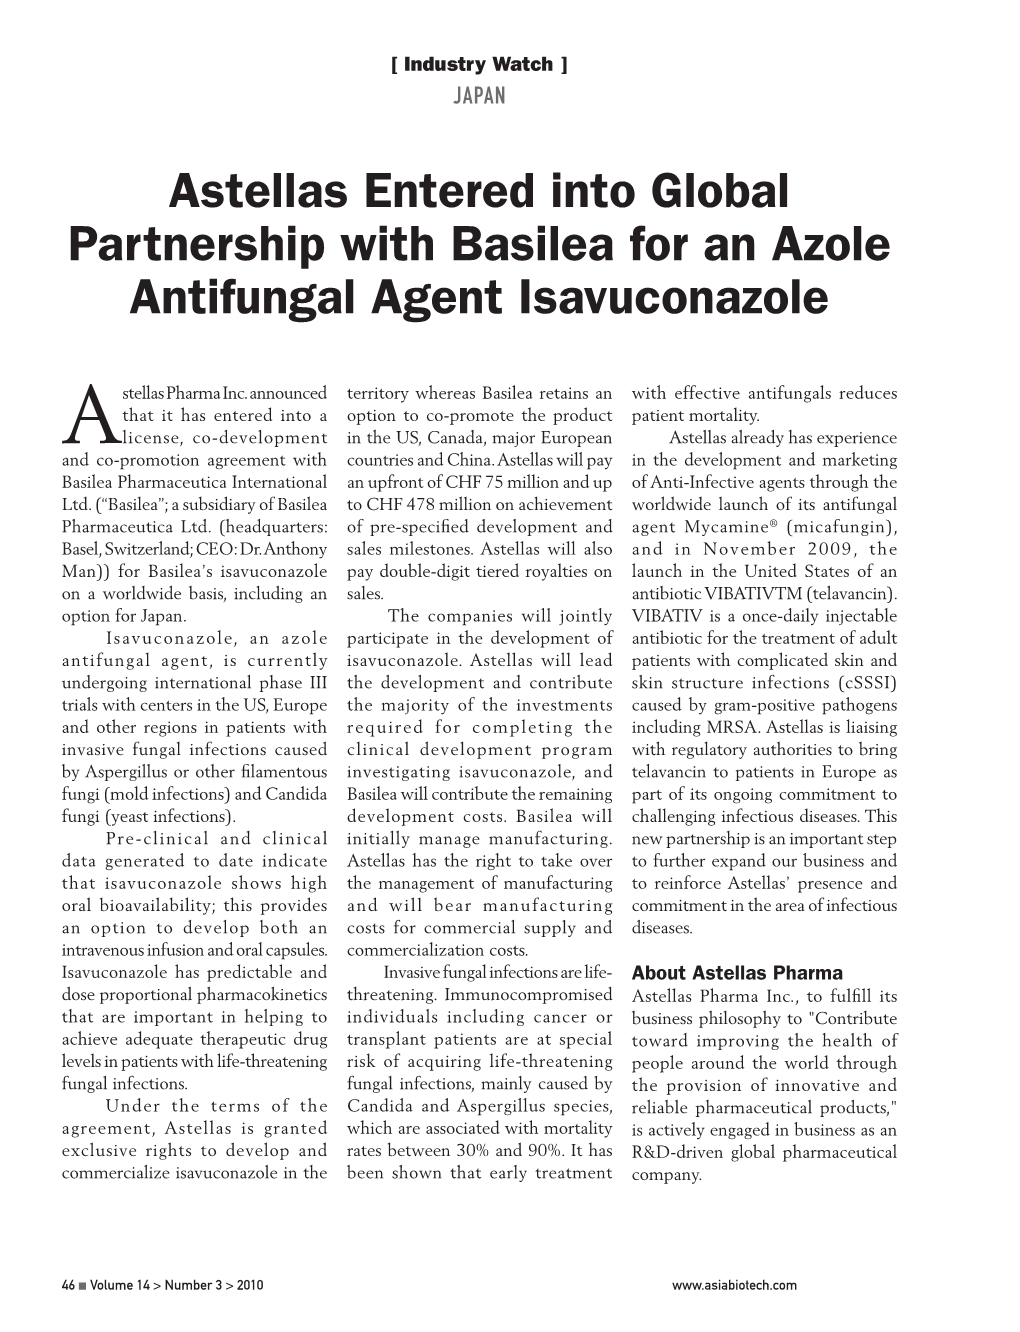 Astellas Entered Into Global Partnership with Basilea for an Azole Antifungal Agent Isavuconazole